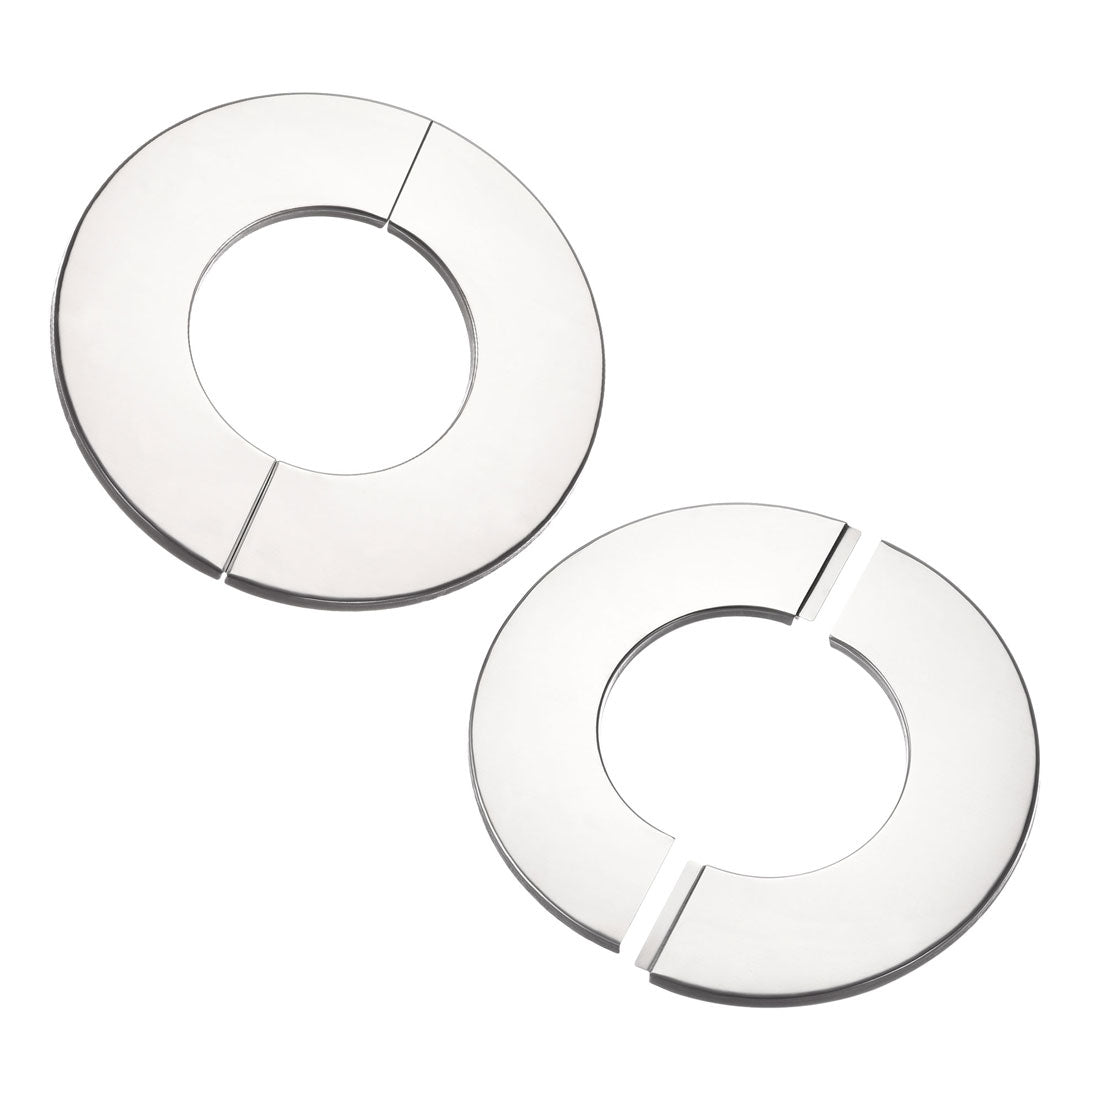 uxcell Uxcell Wall Split Flange, Stainless Steel Round Escutcheon Plate 2Pcs